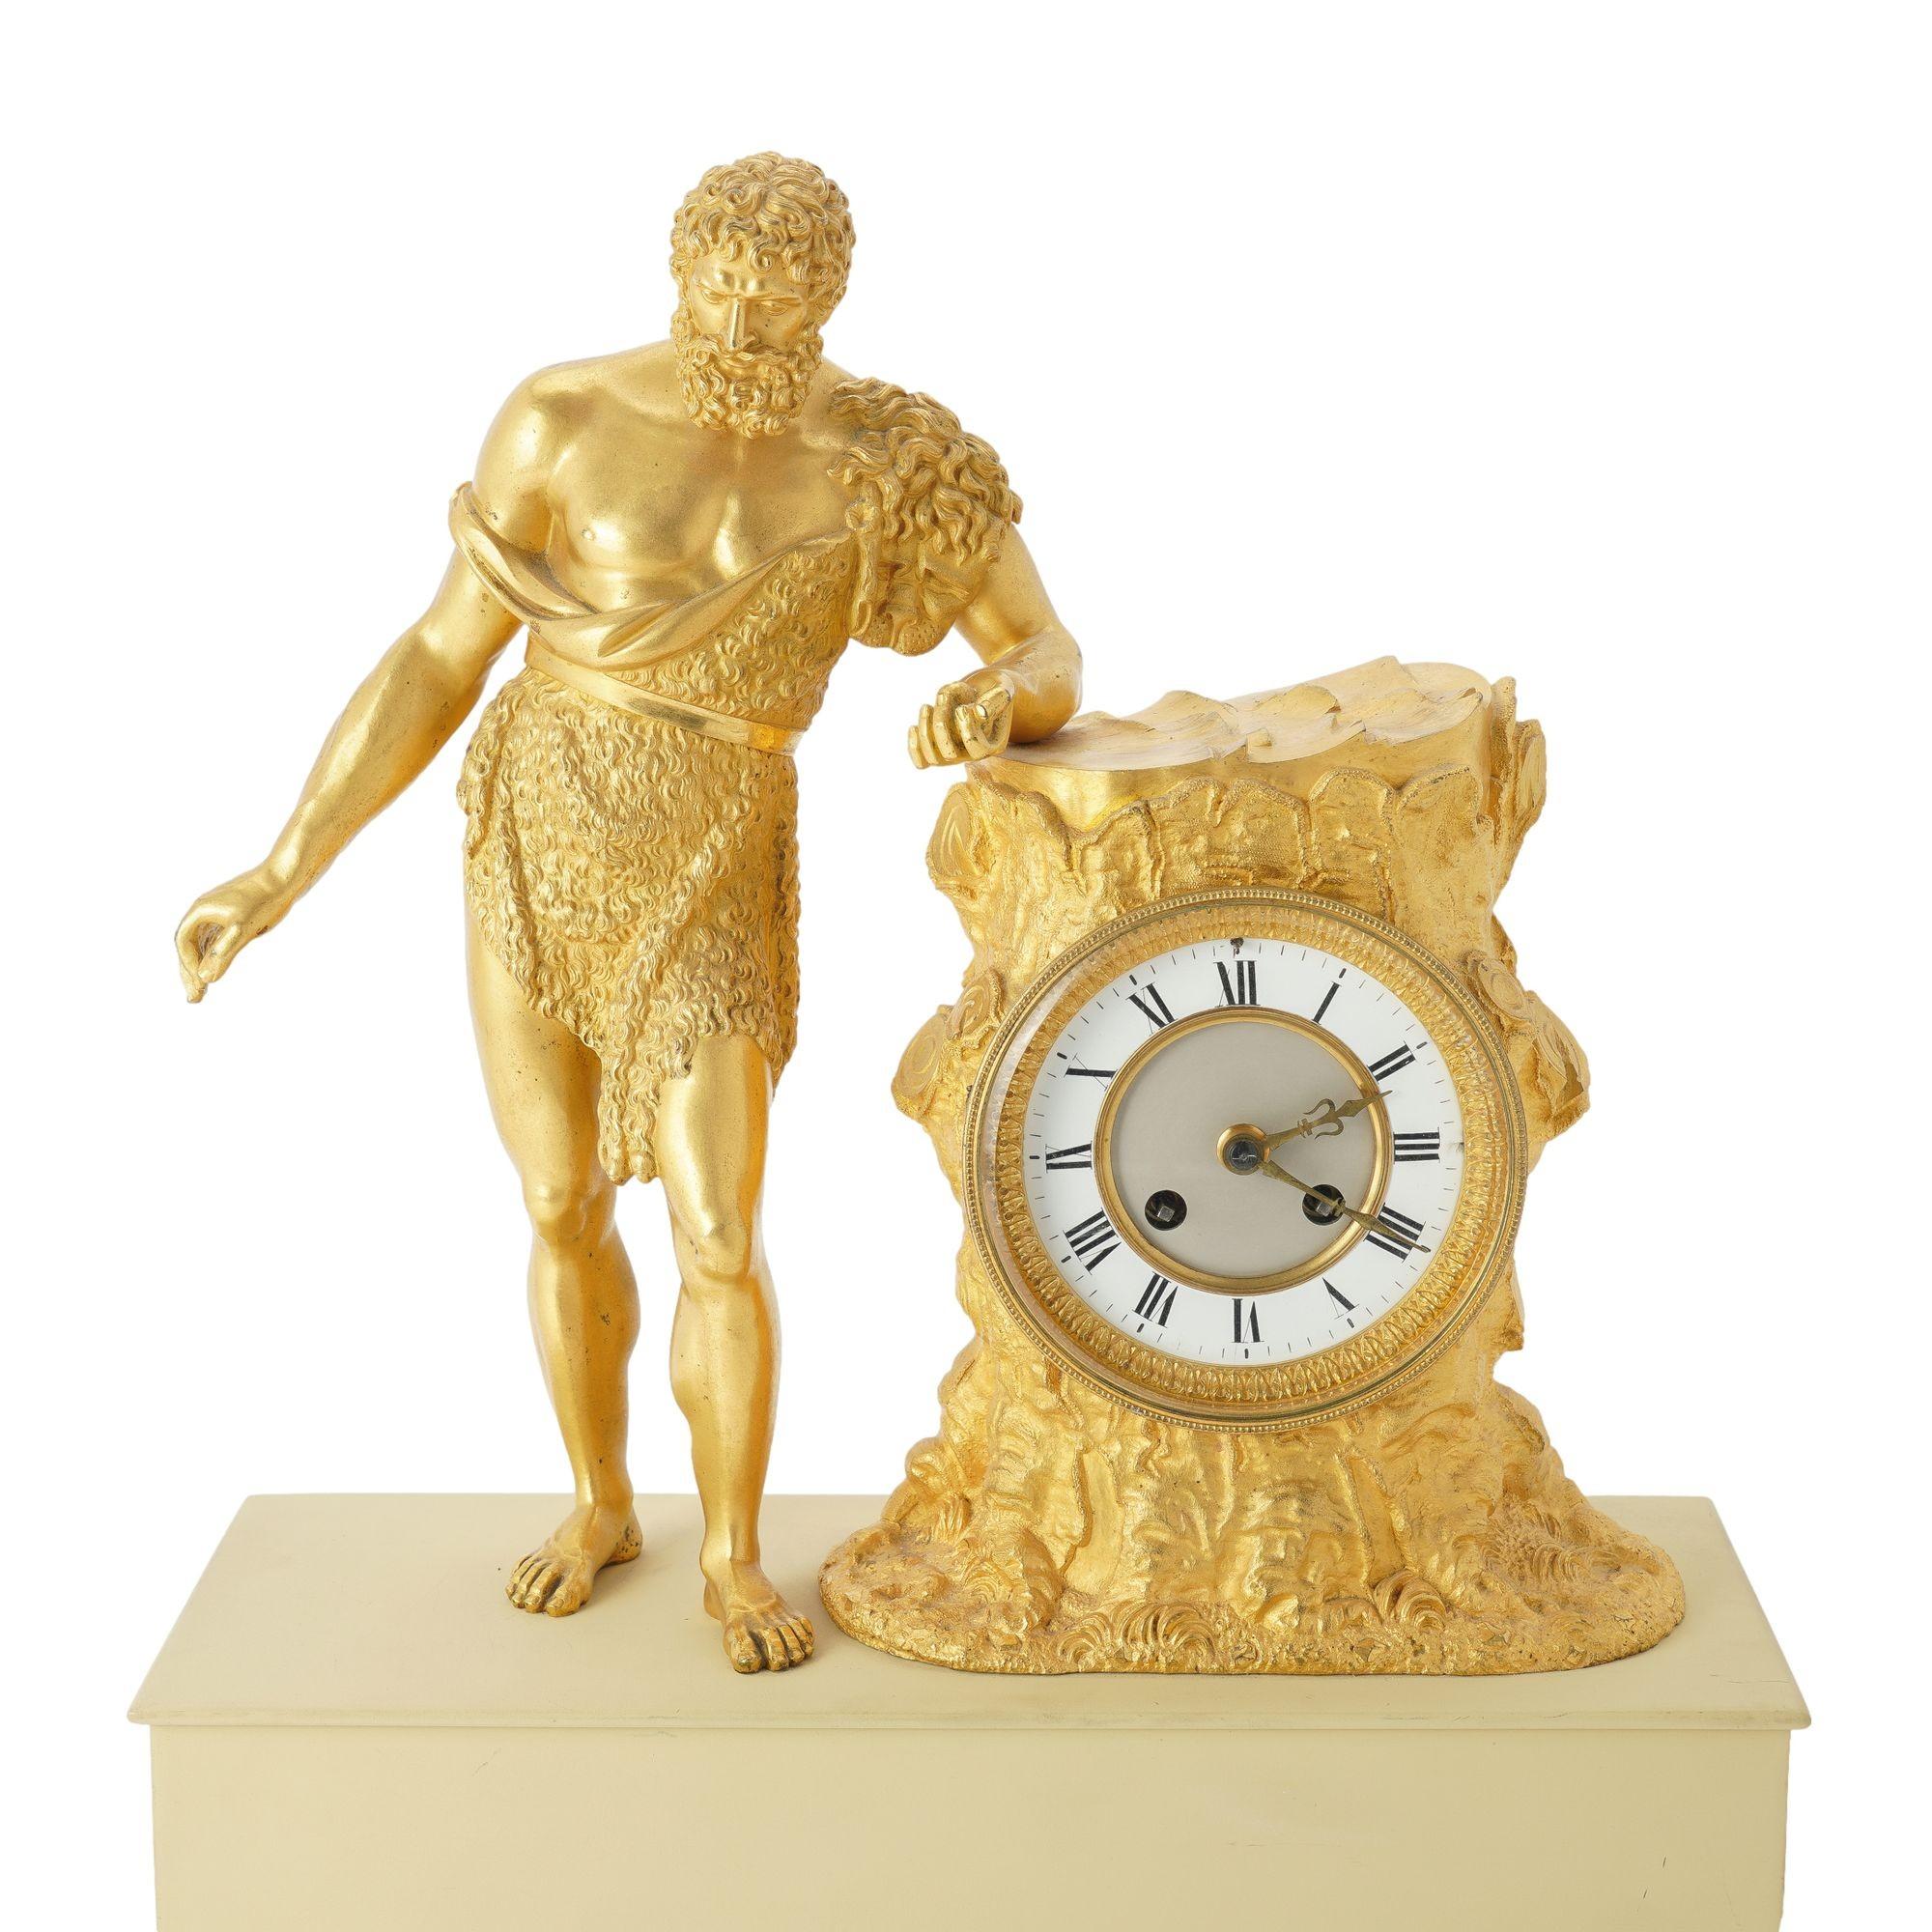 Charles X period fire gilt bronze mantel clock with a Classical figure of Paris holding an apple & leaning on a tree stump. The stump is fitted with a Paris style, two train, hour striking mechanism clock with porcelain face. The figure is mounted